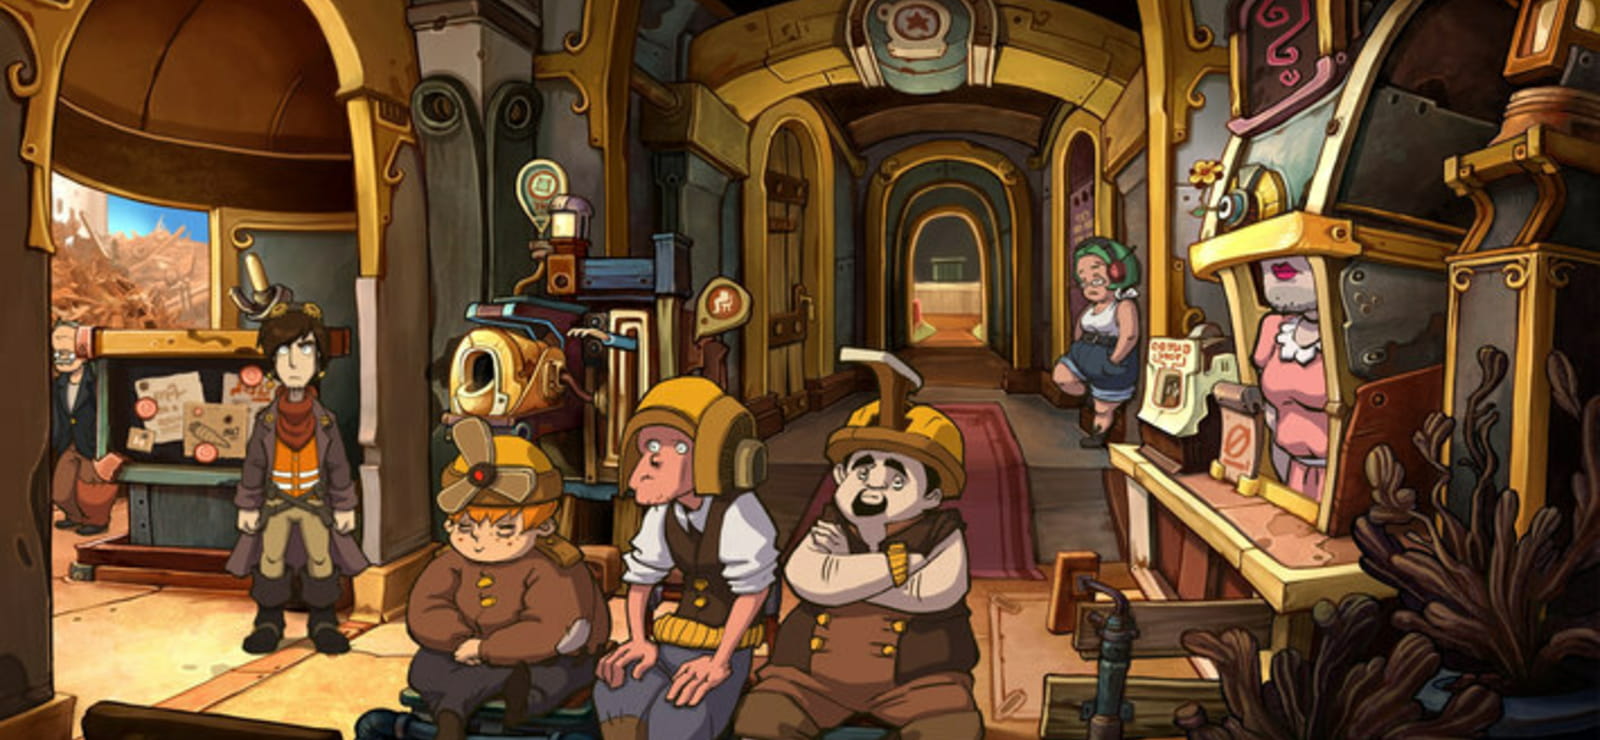 Deponia Full Scrap Collection